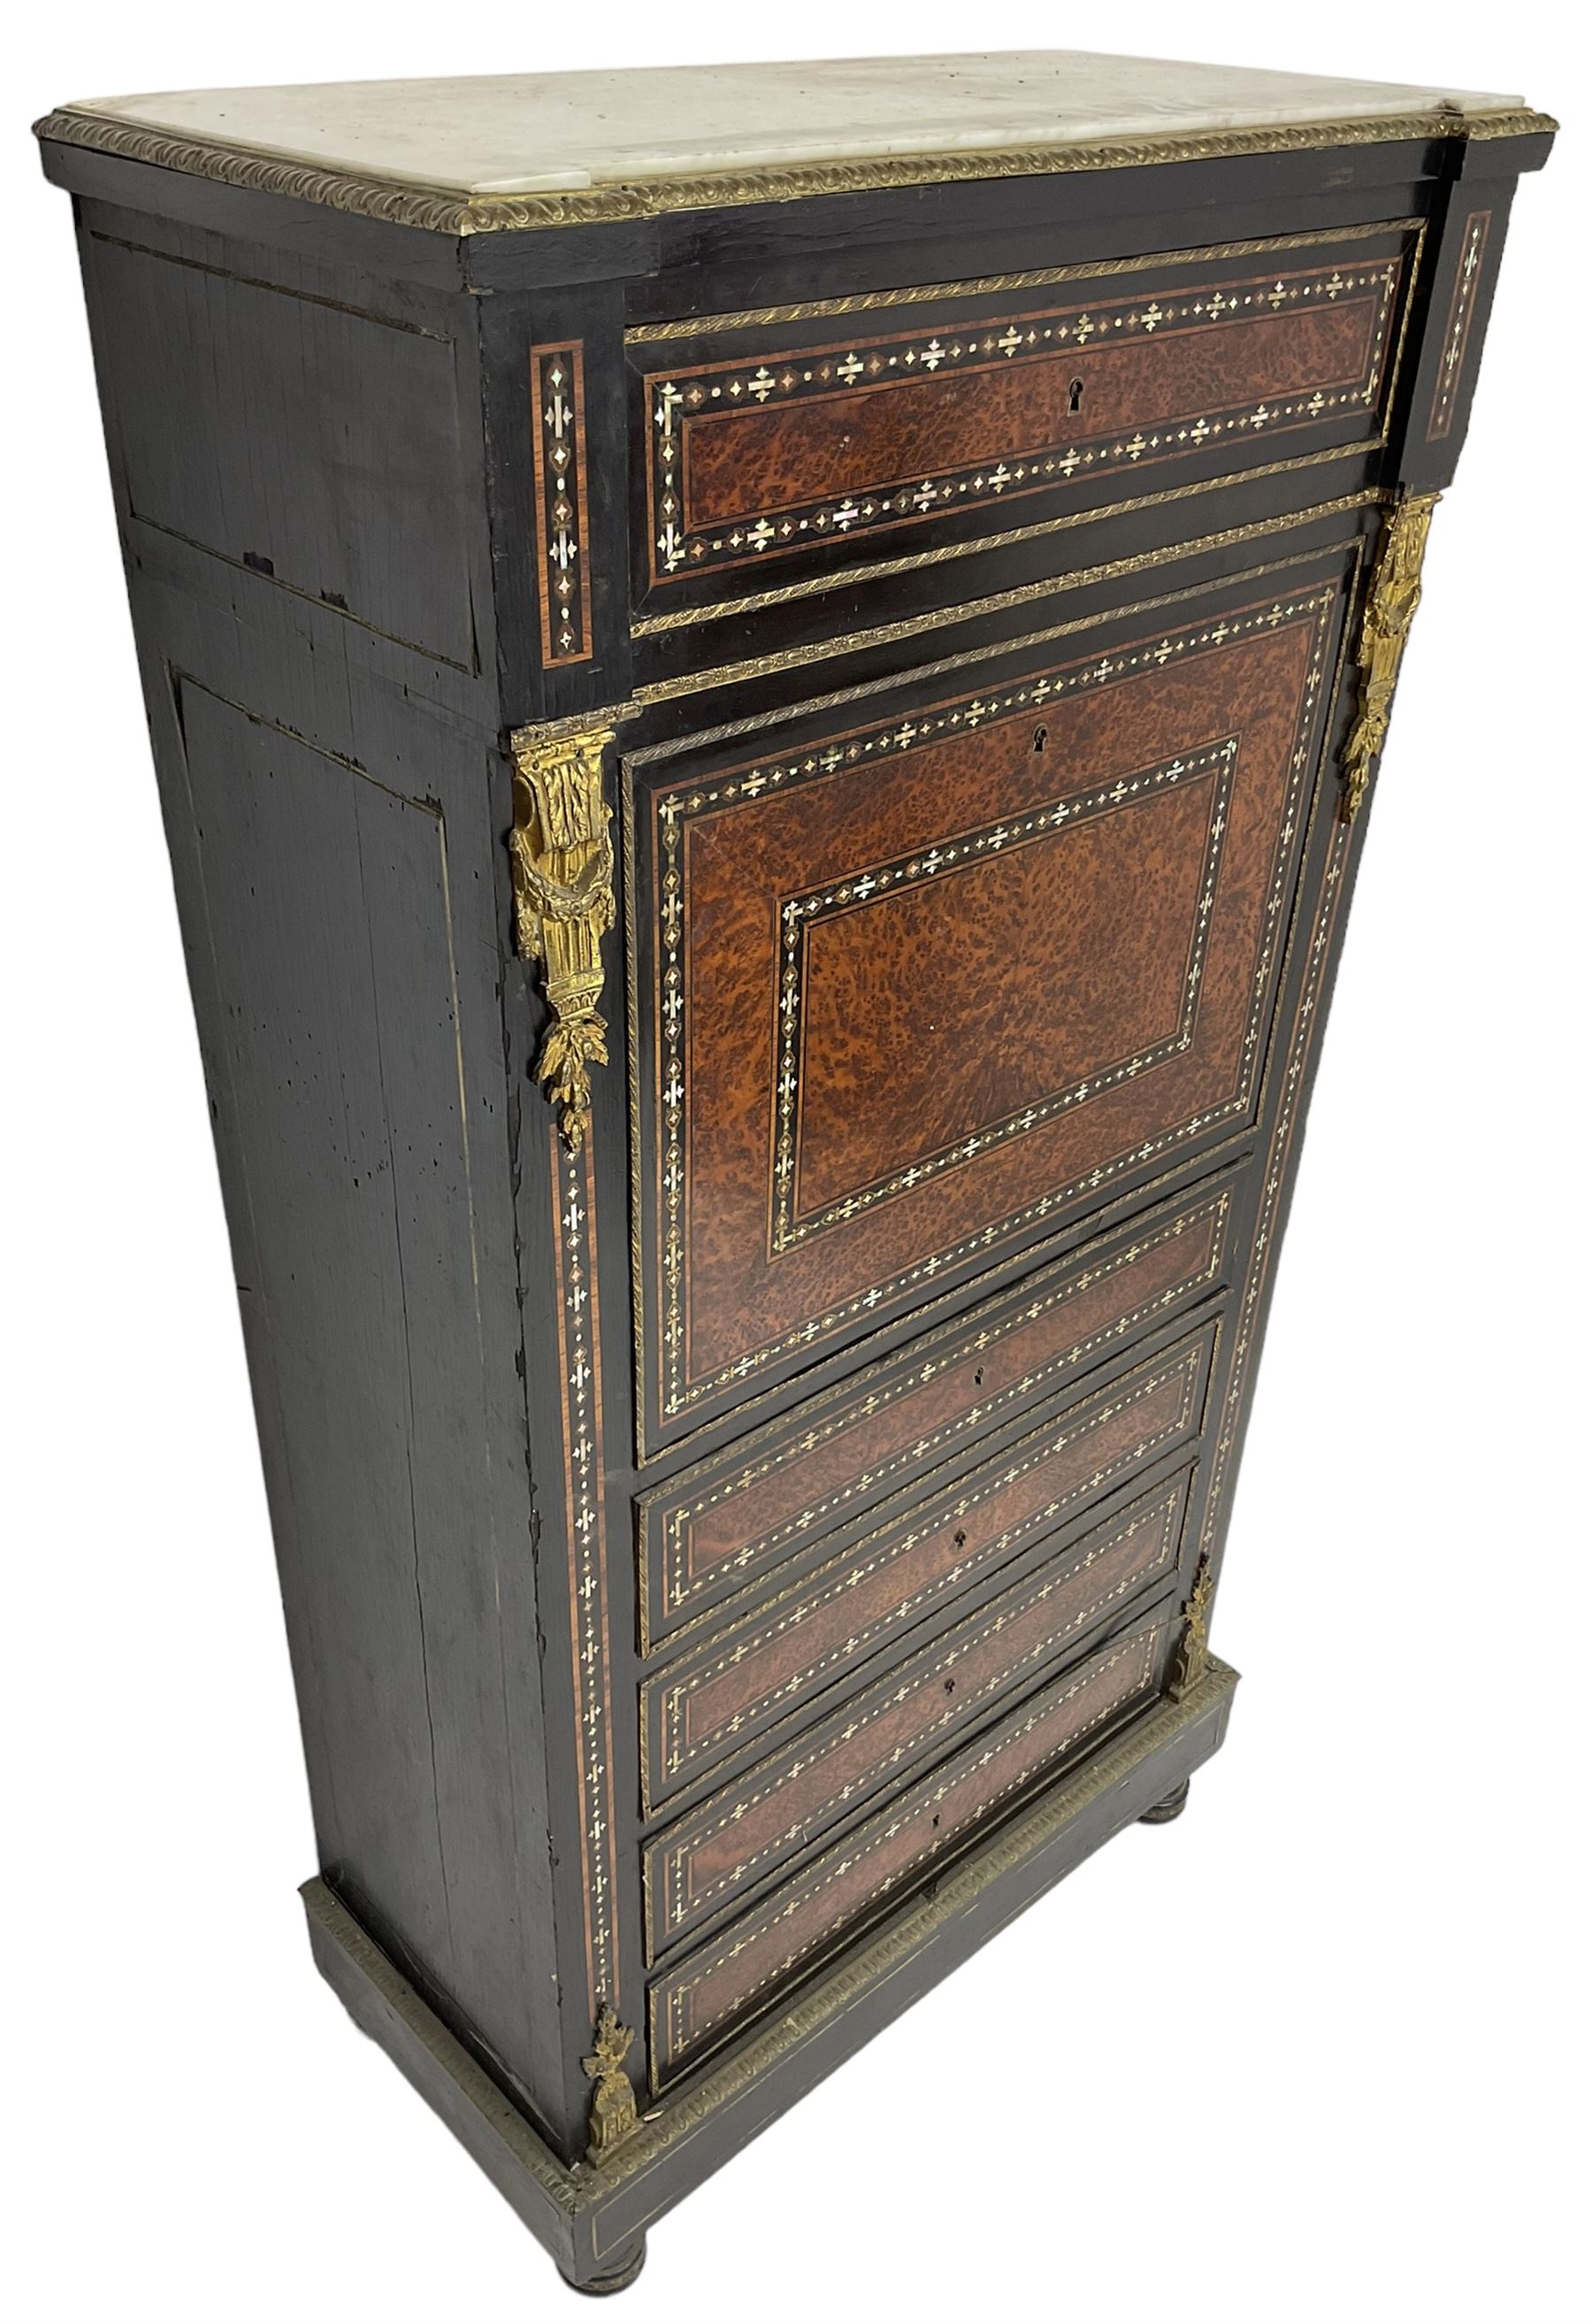 Late 19th century French ebonised and amboyna secrétaire à abattant - Image 6 of 8